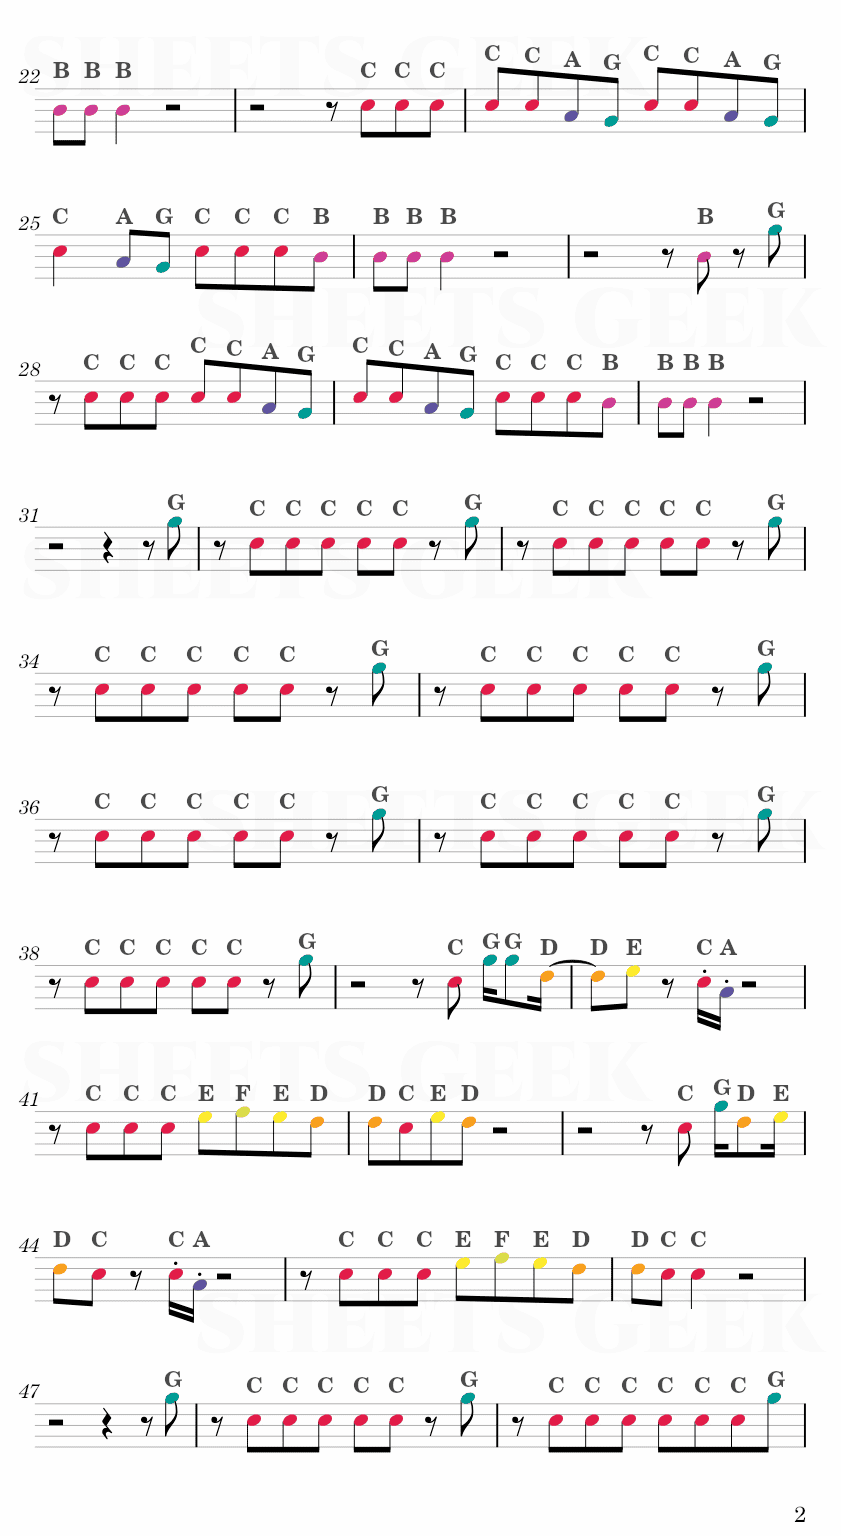 Somebody Else - The 1975 Easy Sheet Music Free for piano, keyboard, flute, violin, sax, cello page 2